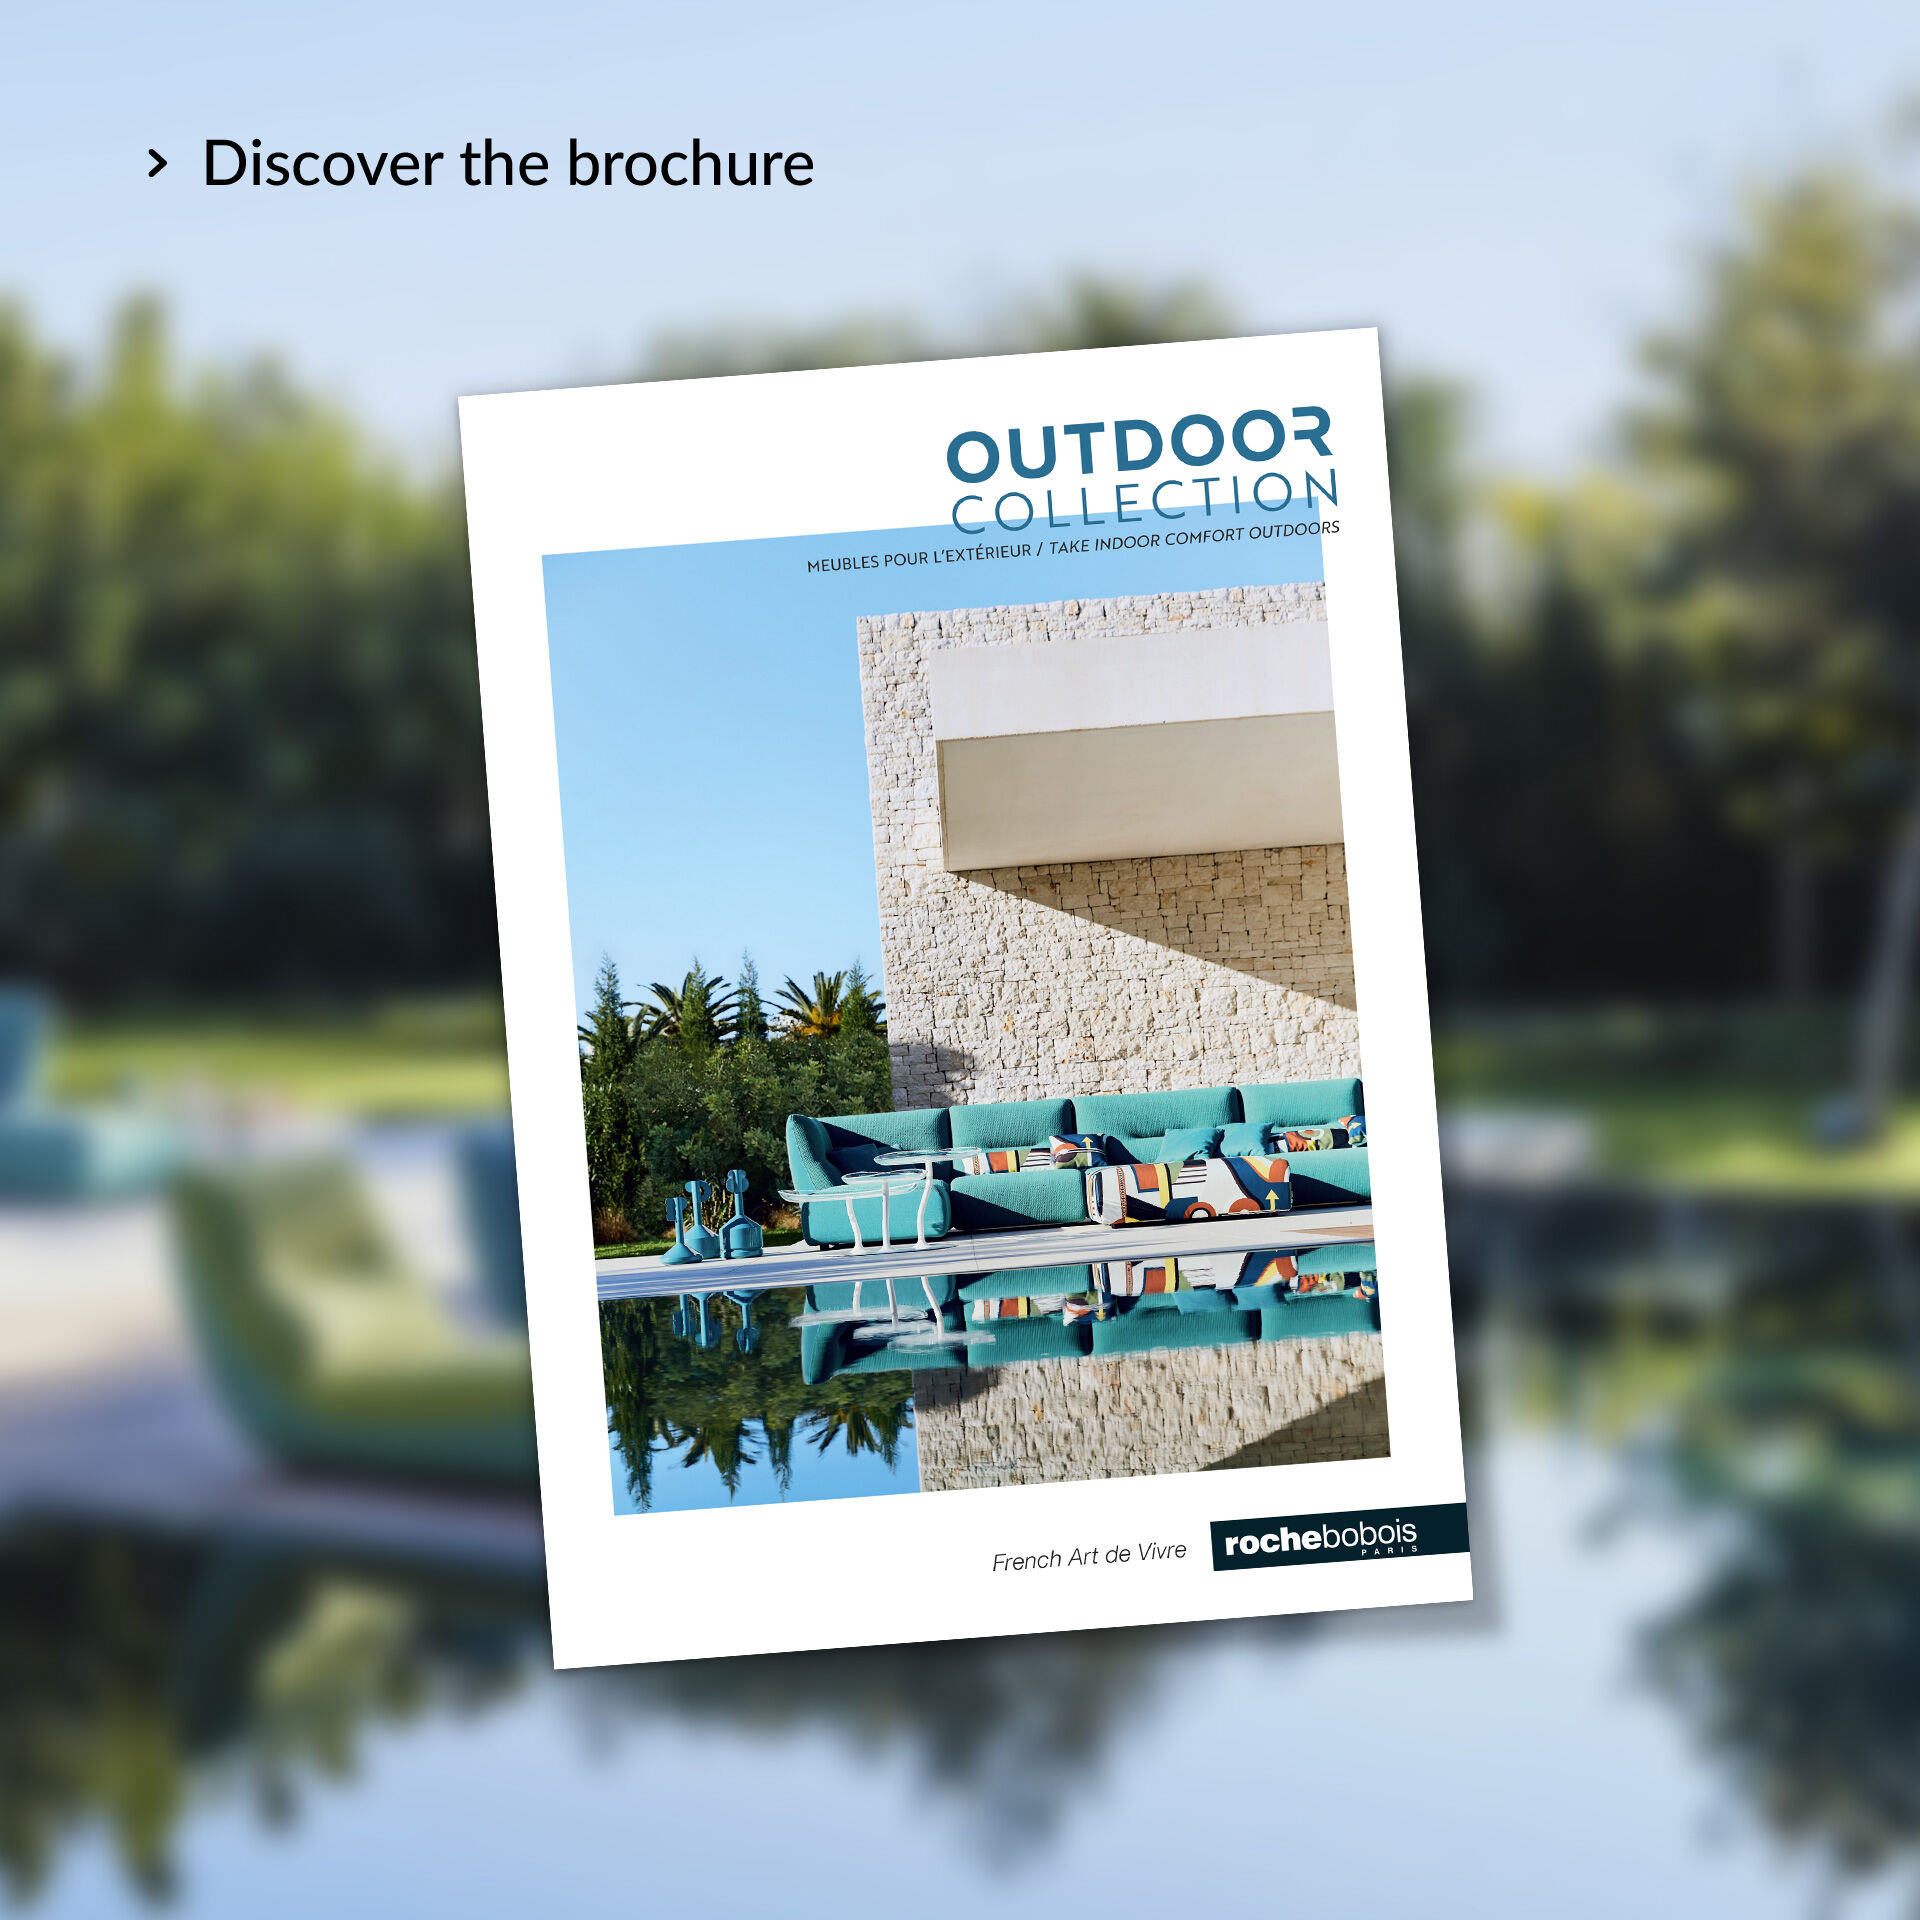 Discover the brochure